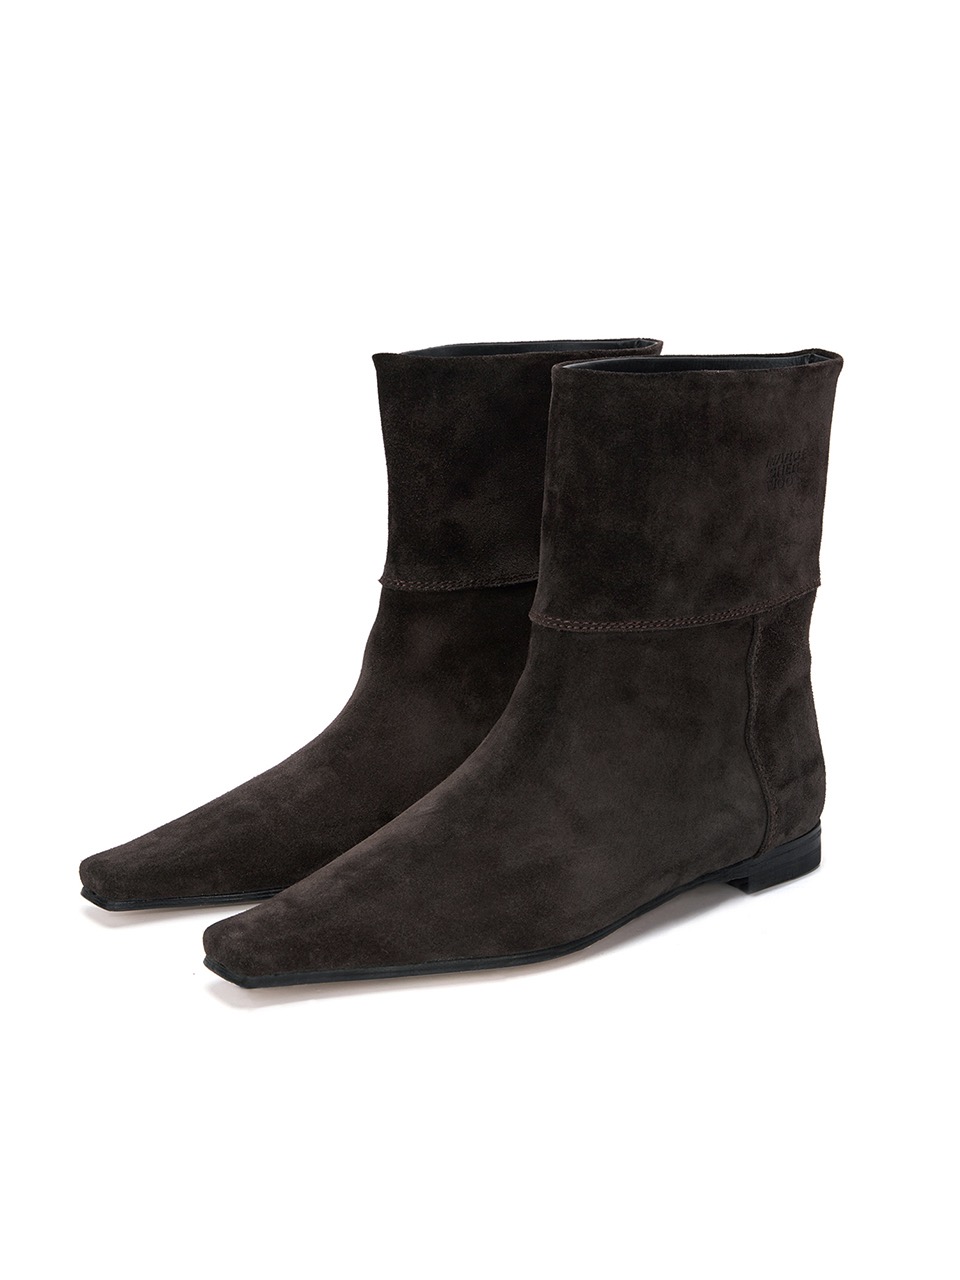 POINTED TOE ANKLE BOOTS_dark brown suede